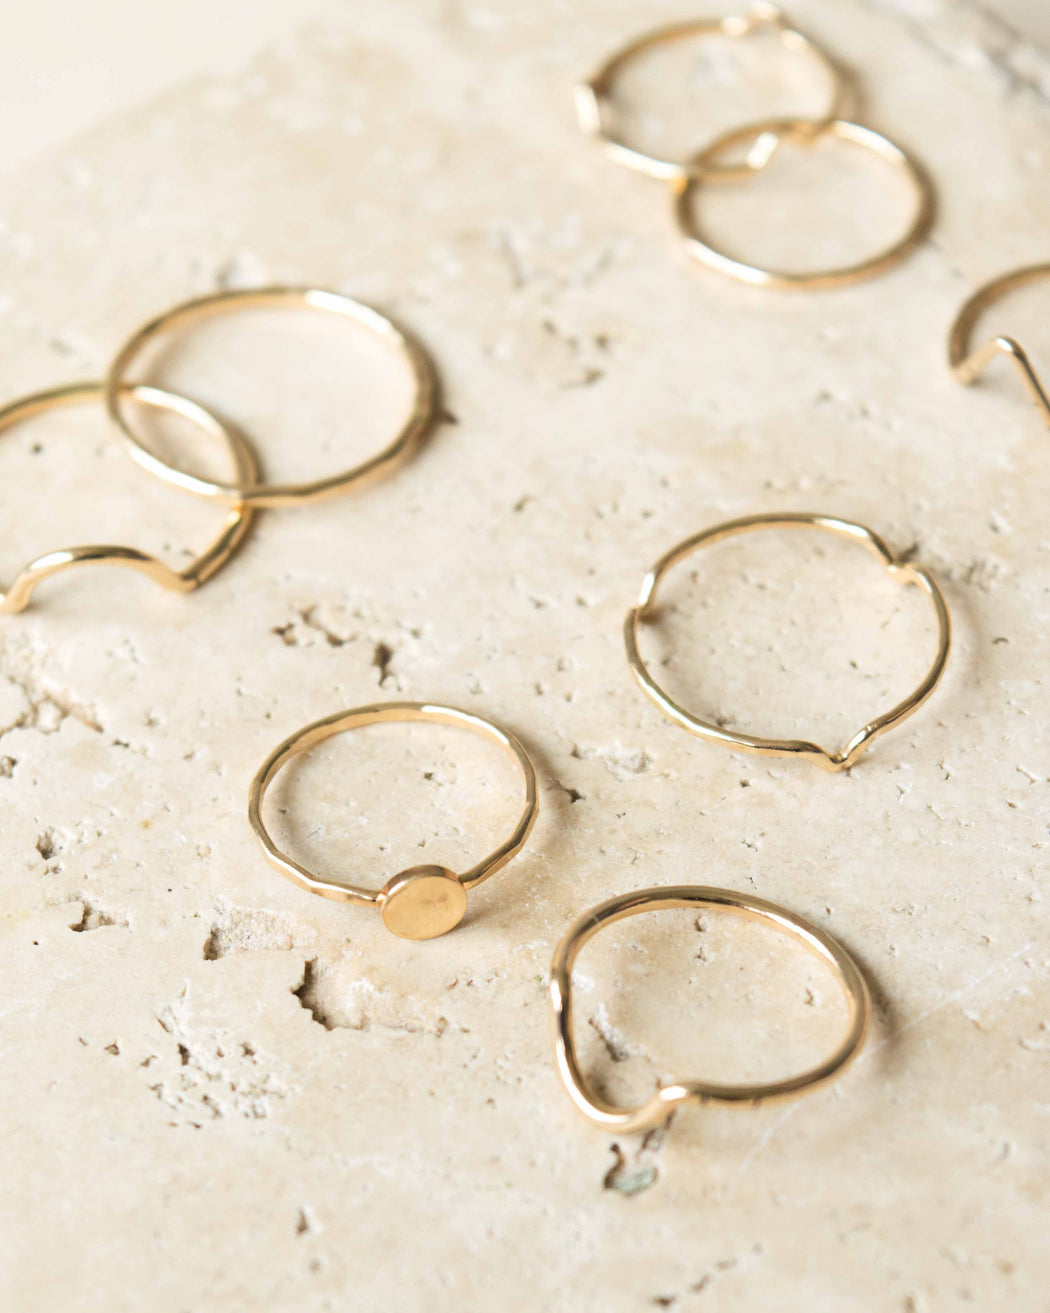 Goldeluxe - Arc Stacking Ring | 14k Gold Fill